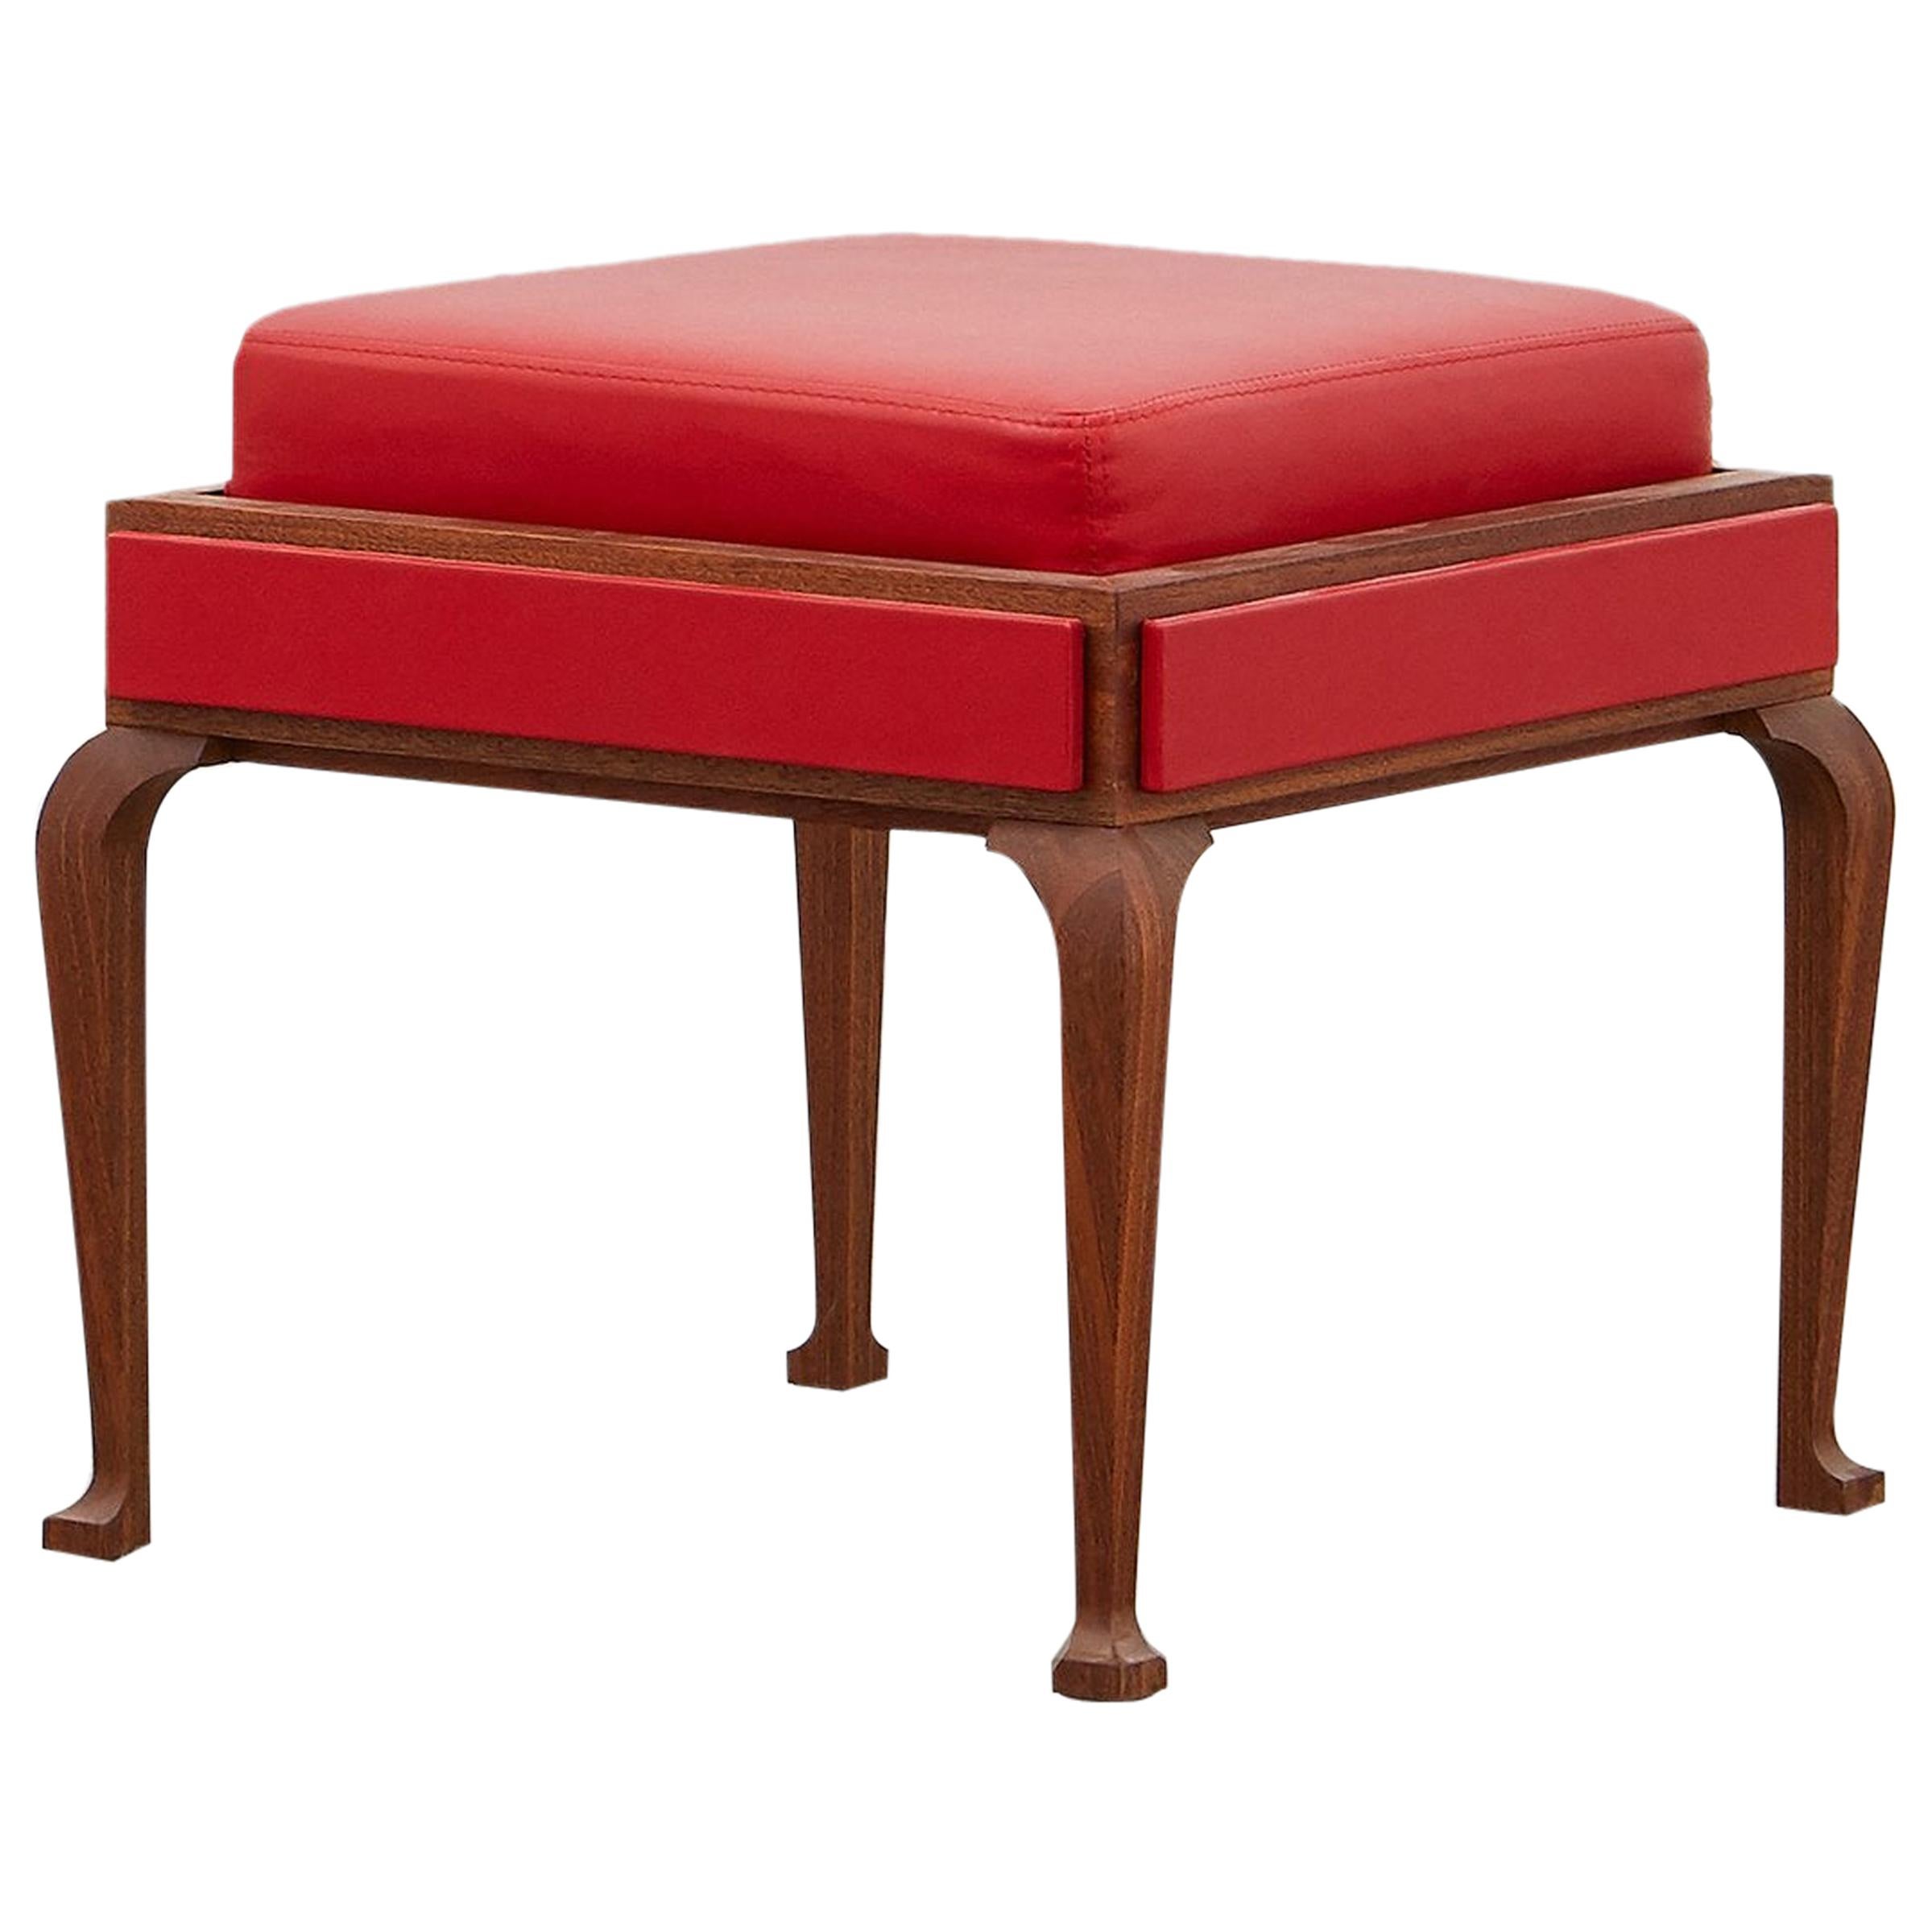 Ph Stool, Wood Legs, Mahogany Veneer, Red Lamb Leather on Panels and Seat For Sale